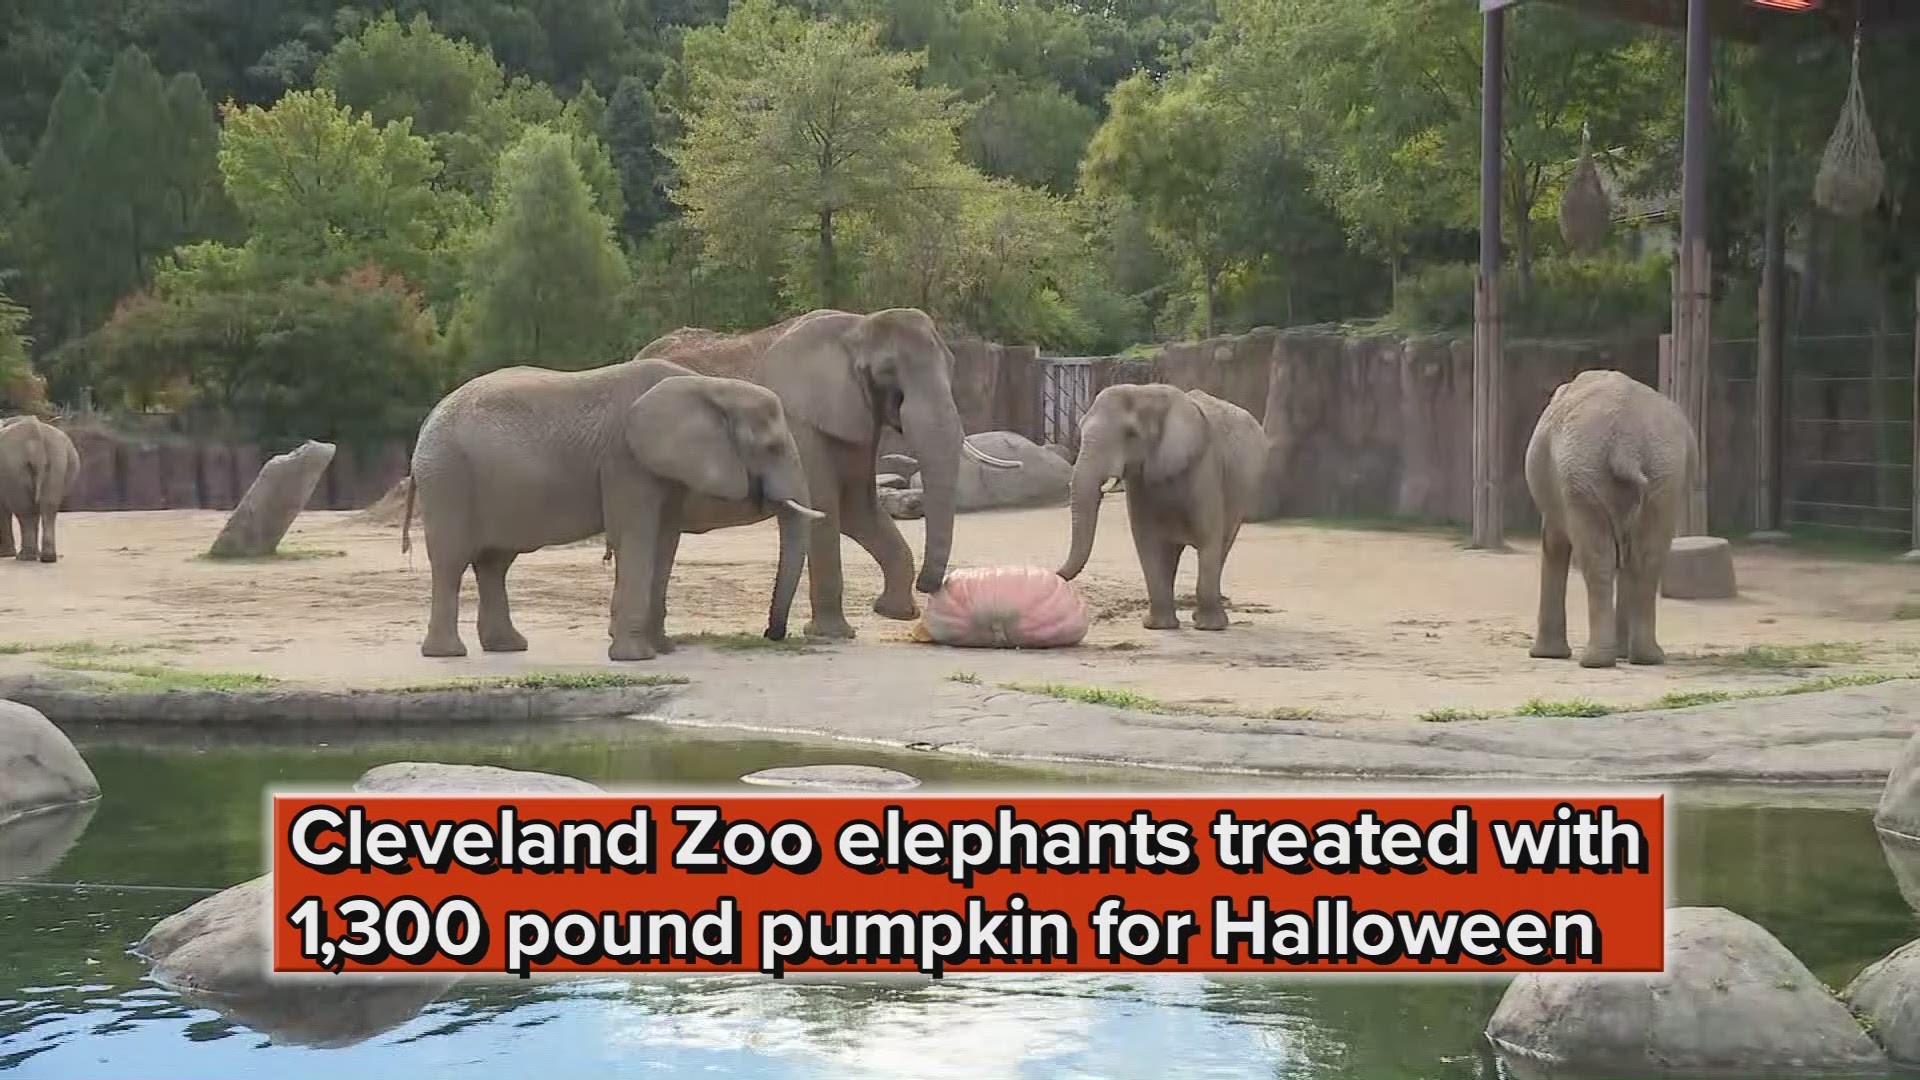 Cleveland Zoo elephants treated with 1,300 pound pumpkin for Halloween